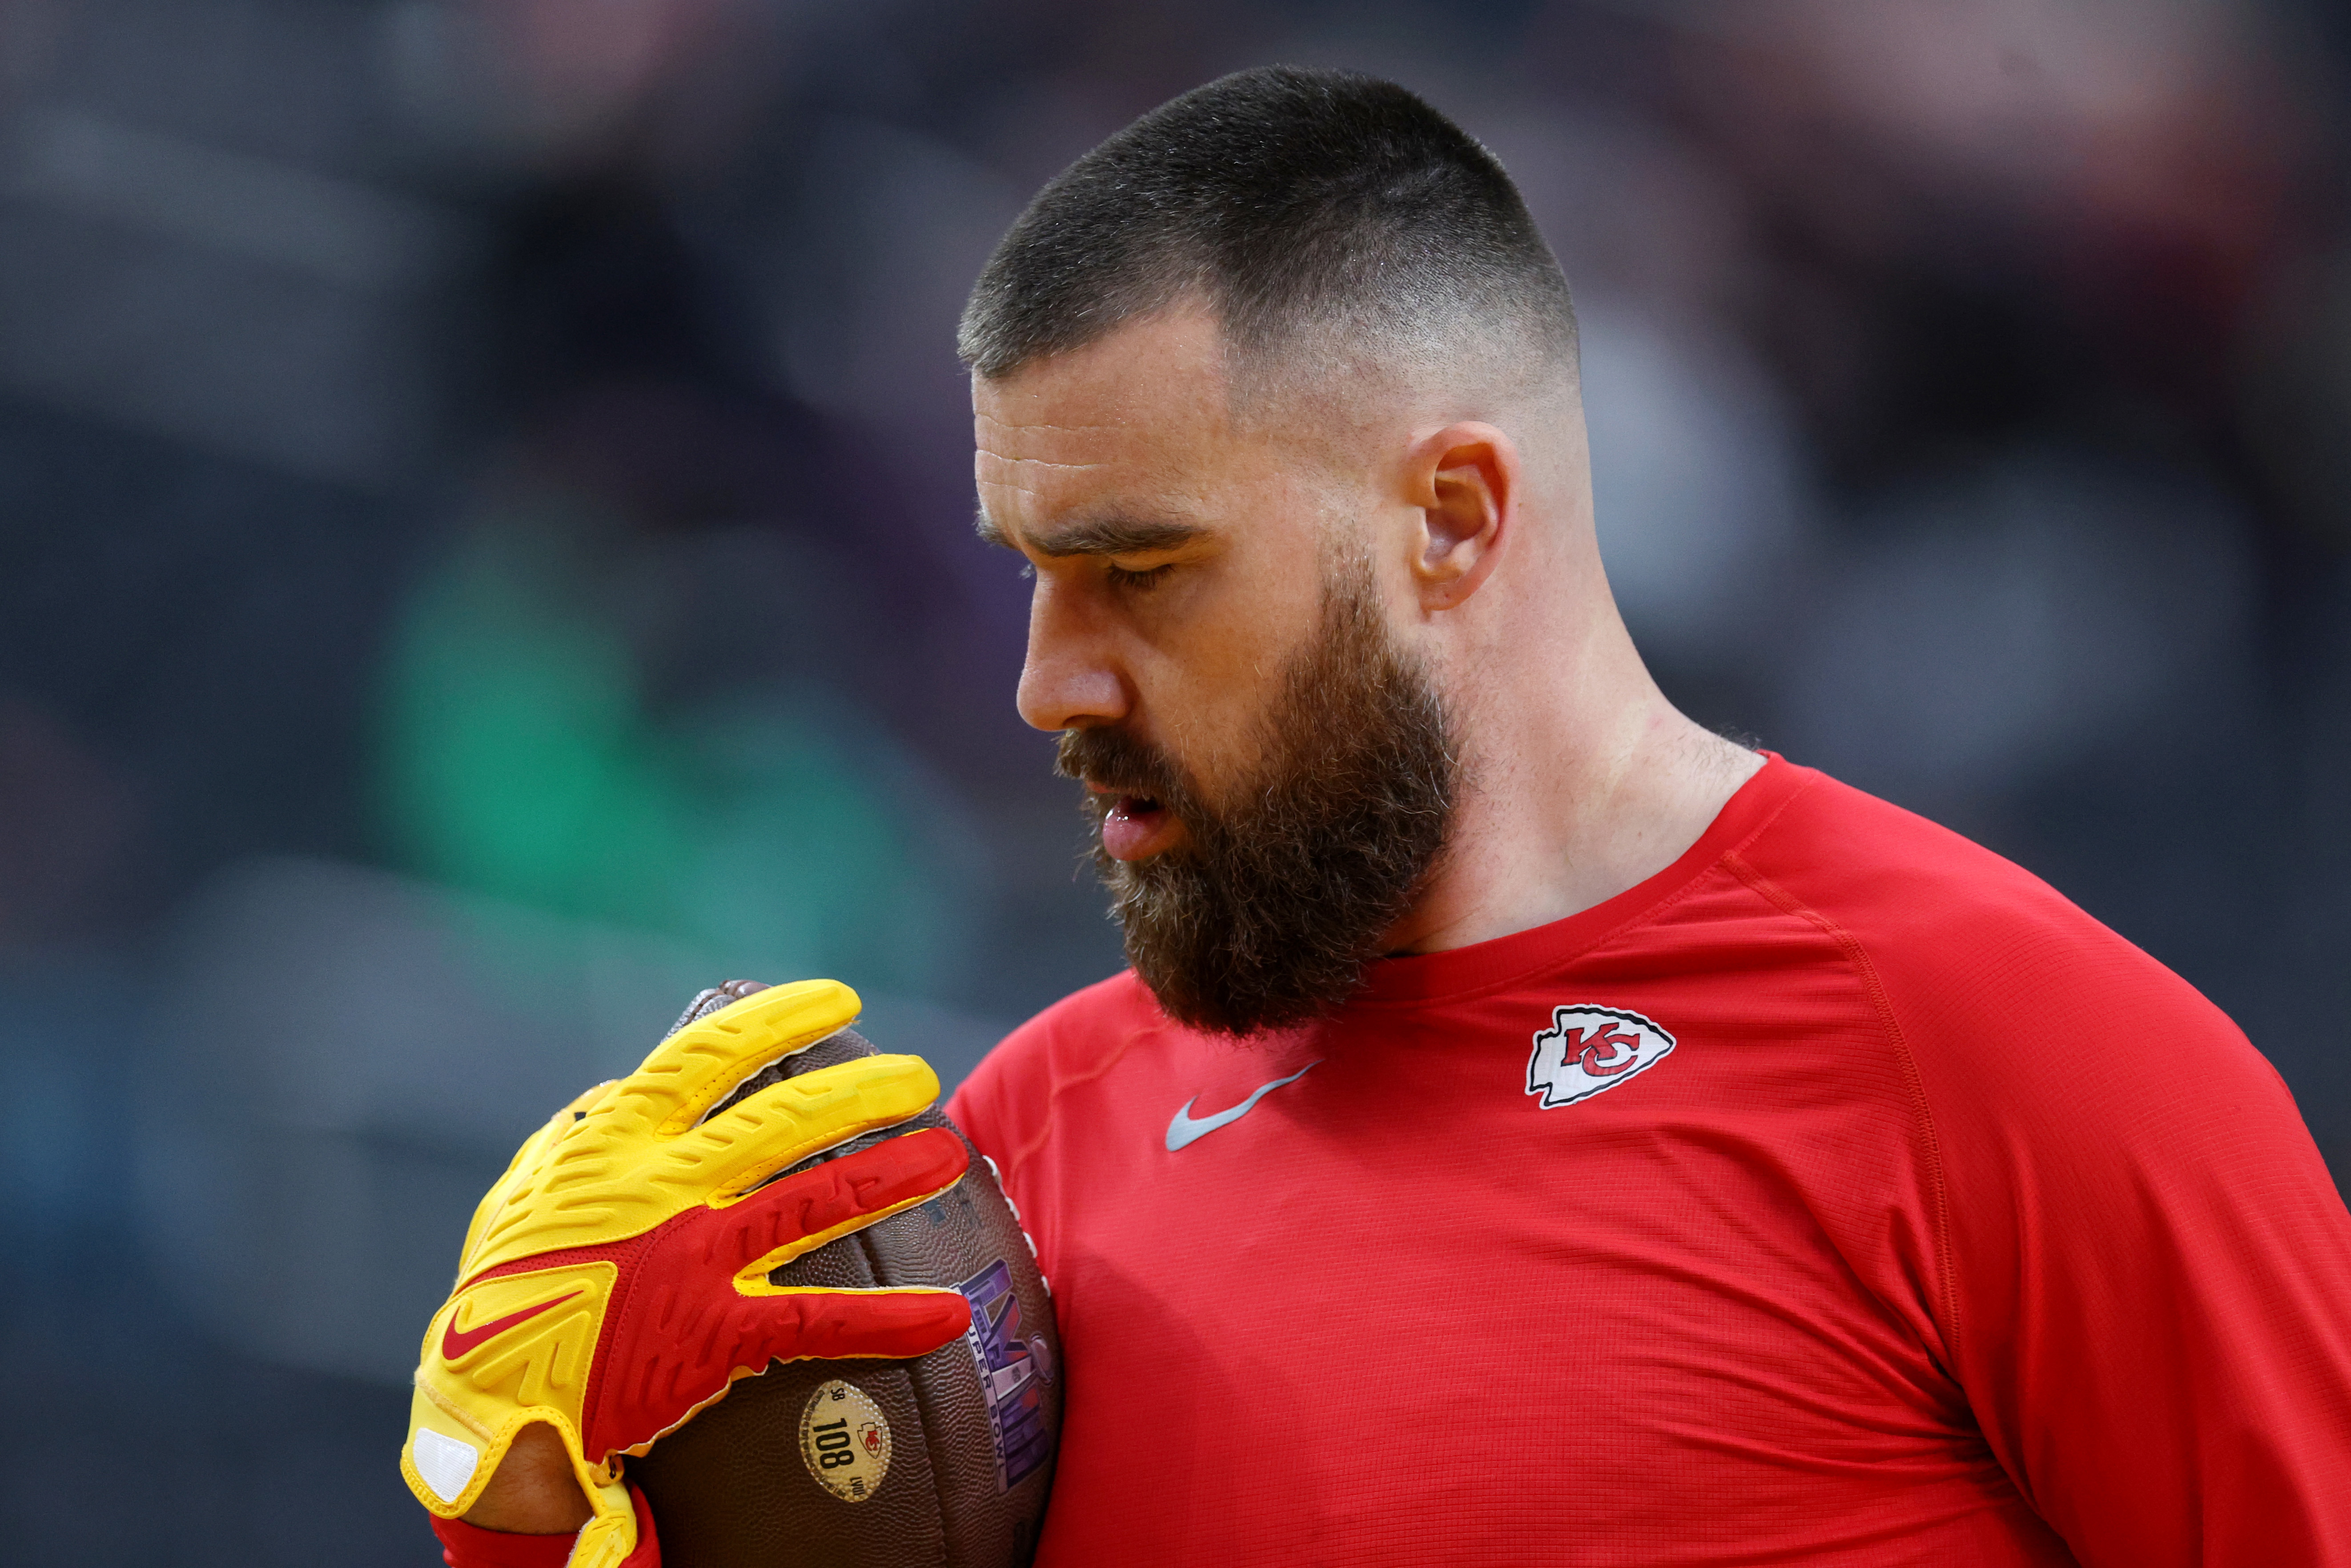 LAS VEGAS, NEVADA - FEBRUARY 11: Travis Kelce #87 of the Kansas City Chiefs warms-up before Super Bowl LVIII at Allegiant Stadium on February 11, 2024 in Las Vegas, Nevada. (Photo by Jamie Squire/Getty Images)